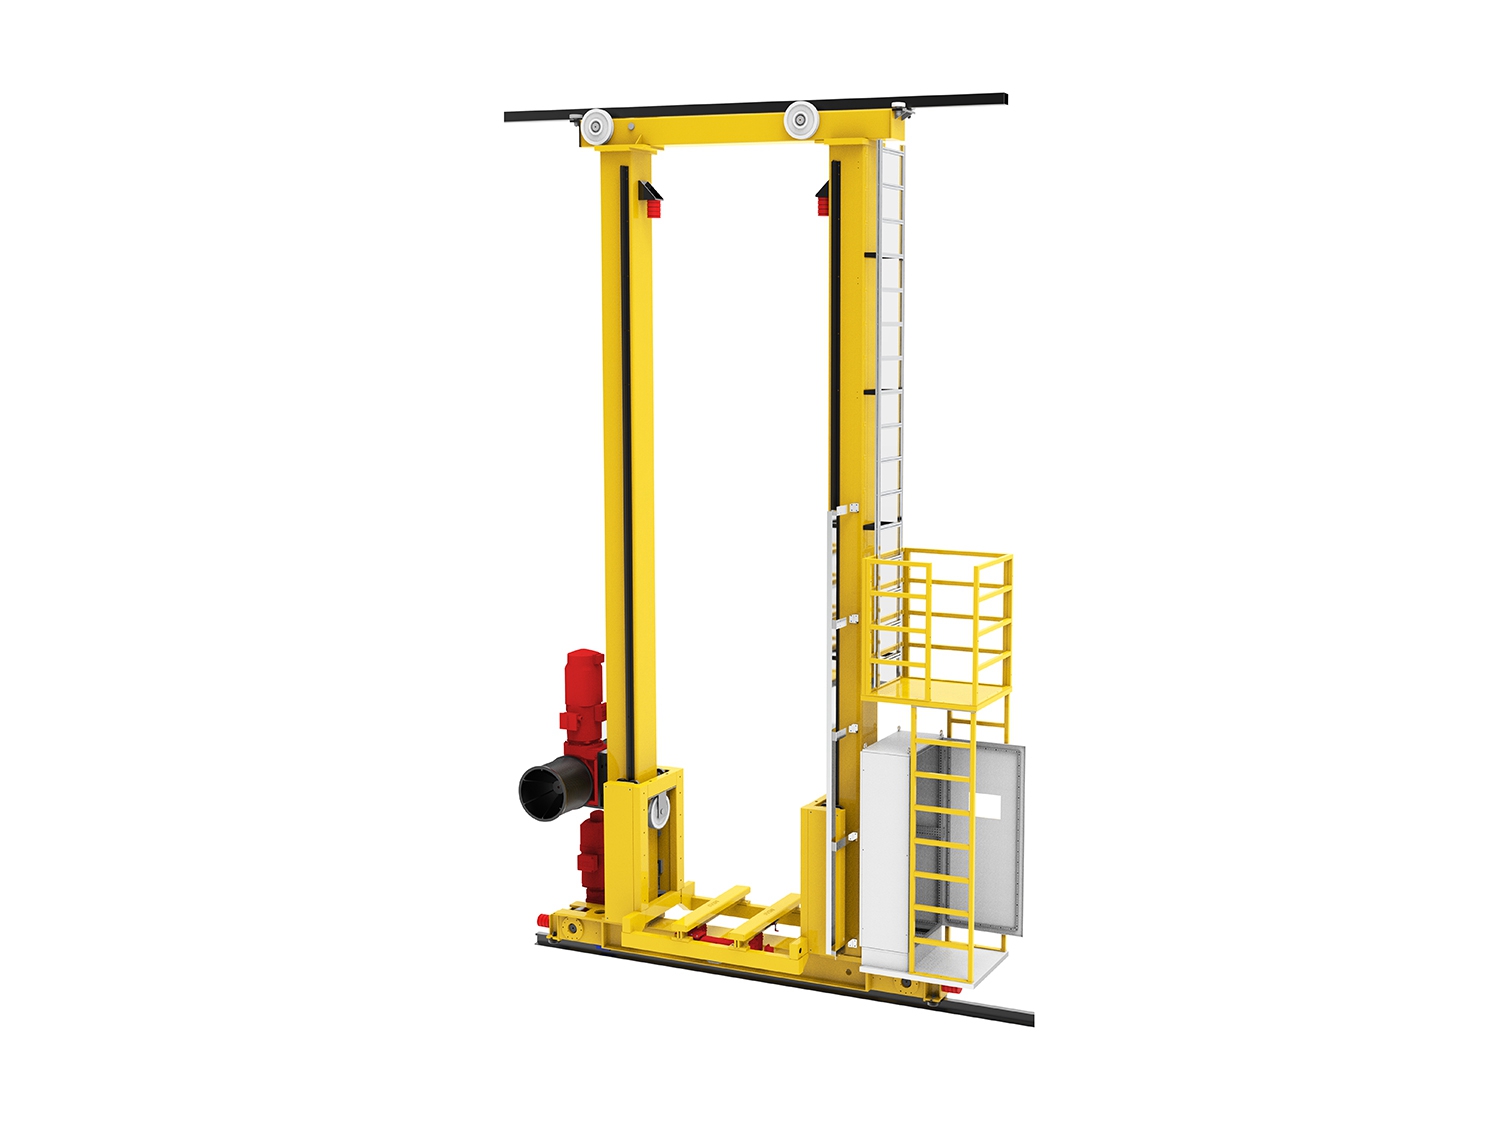 Stacker crane Automated Storage system(AS/RS)